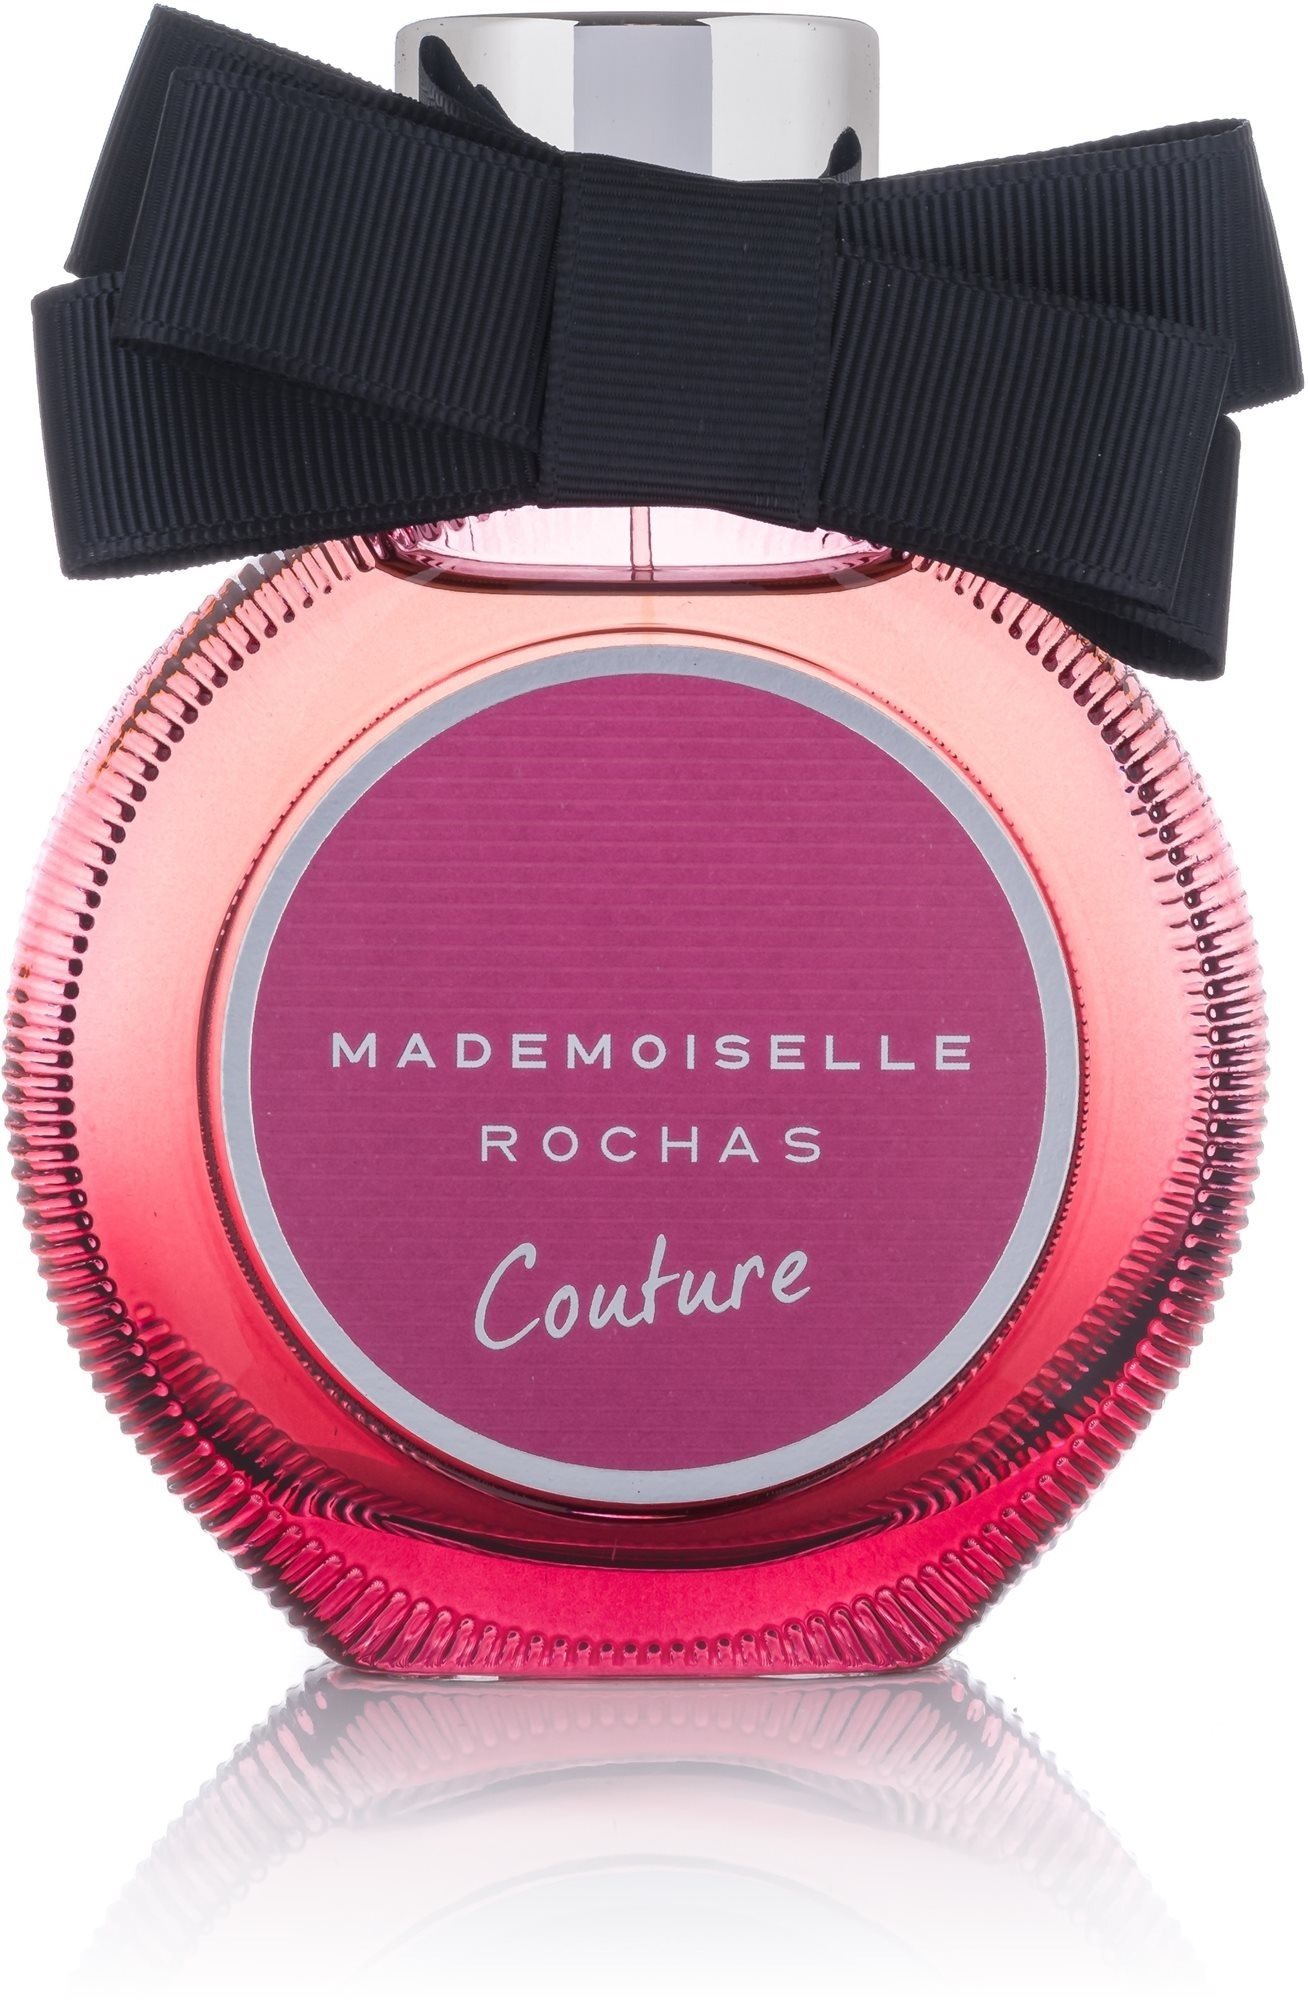 ROCHAS Mademoiselle Couture EdP